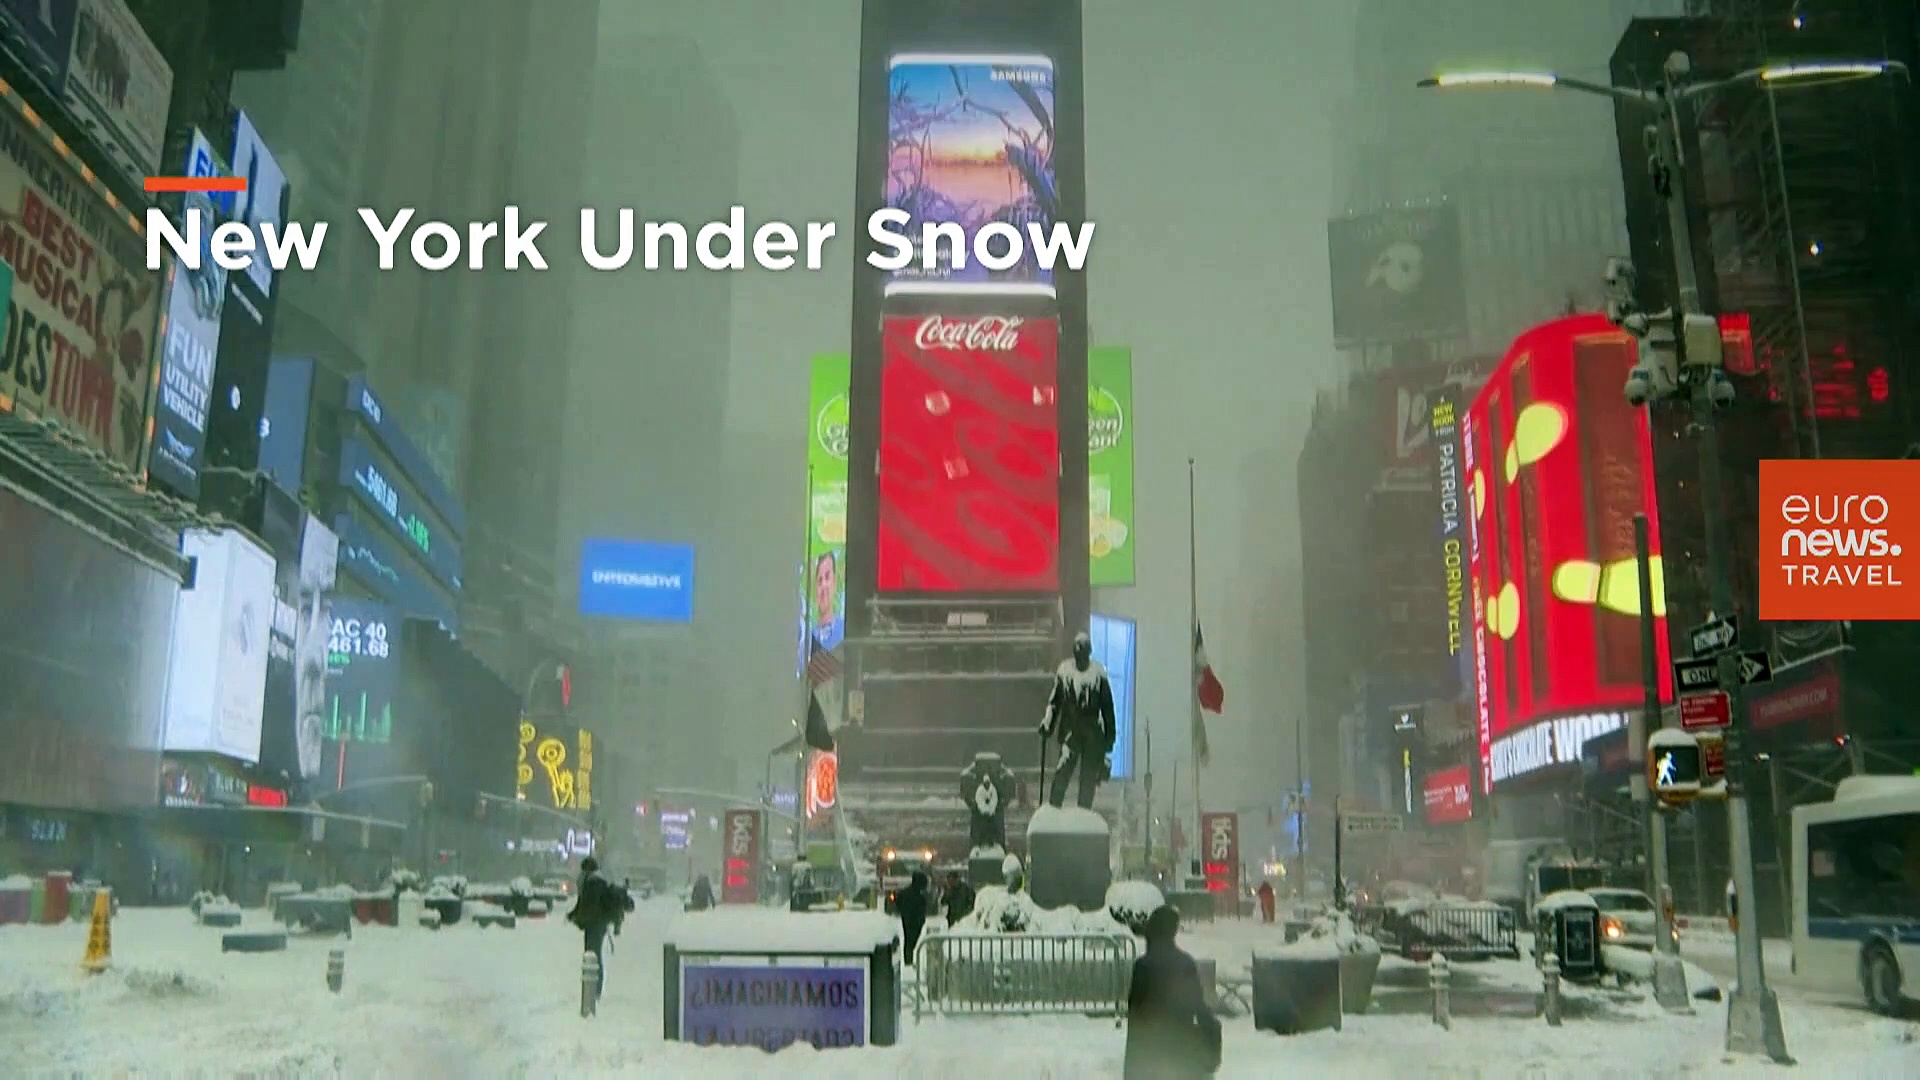 Watch footage of New York's latest snowstorm